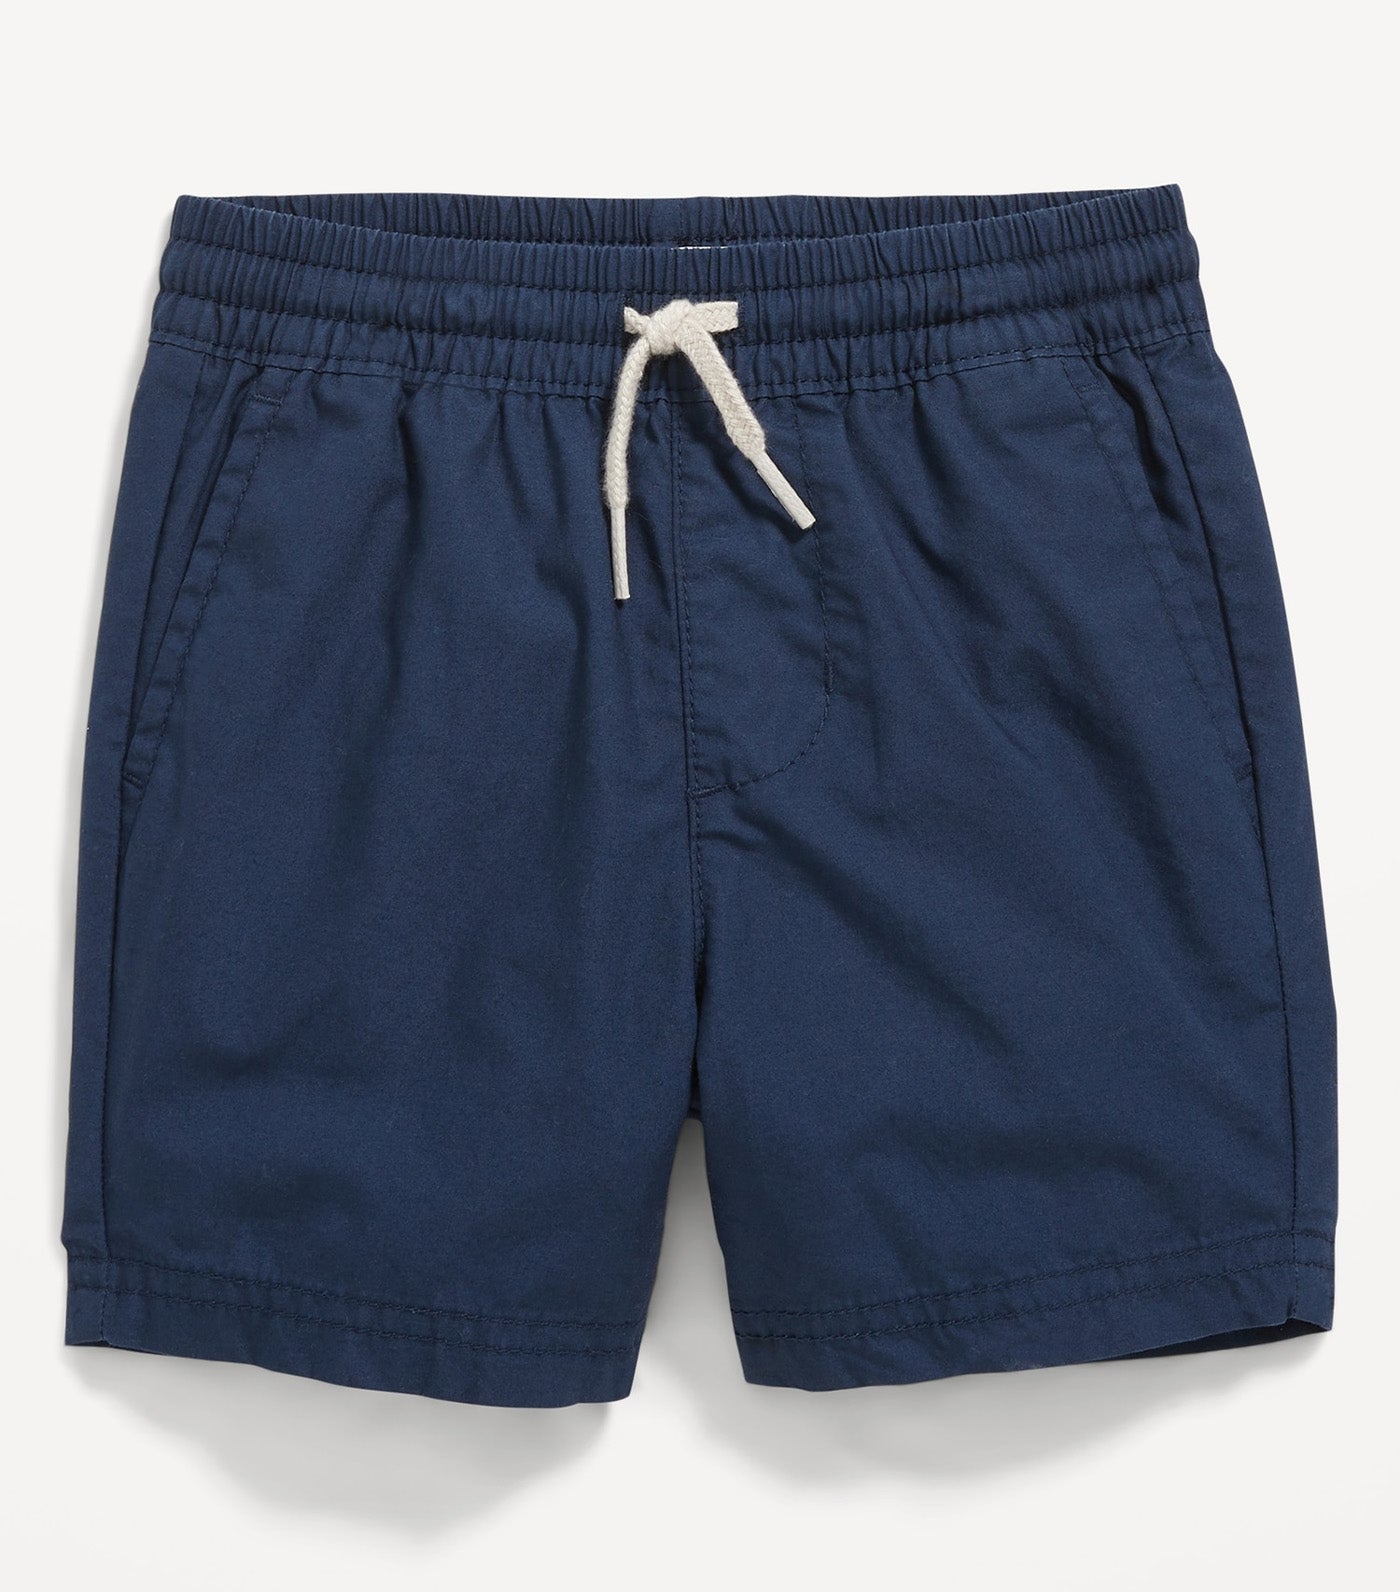 Unisex Cotton Poplin Pull-On Shorts for Toddler - Lost At Sea Navy